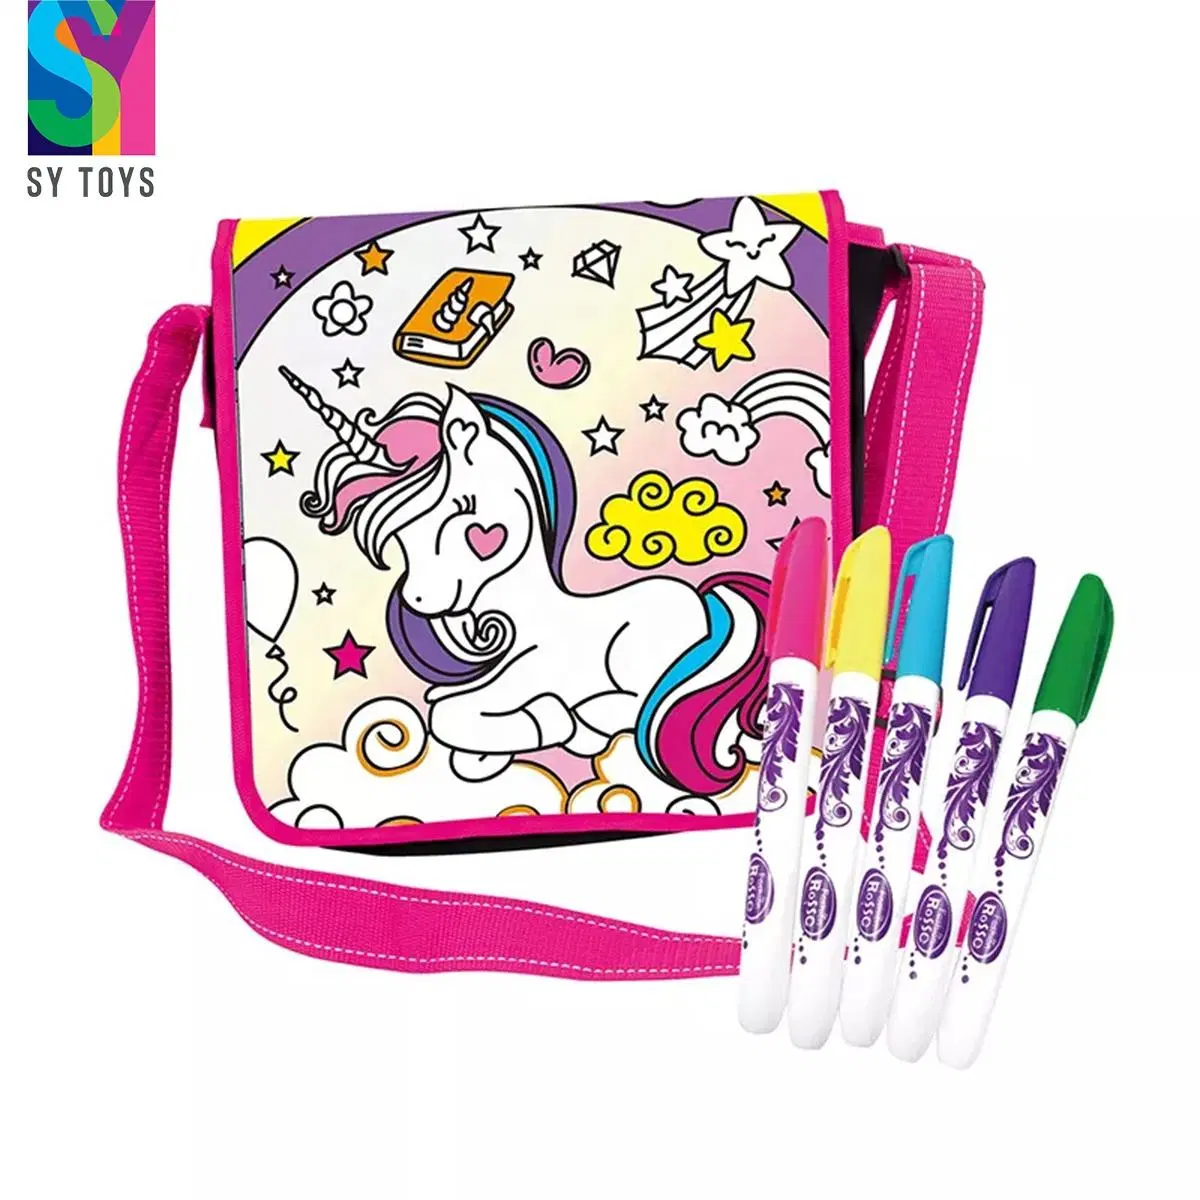 Sy DIY Personalized Doodle Bags Art Activity Best Gift Color Your Own Unicorn Messenger Bag Craft Kit for Girls